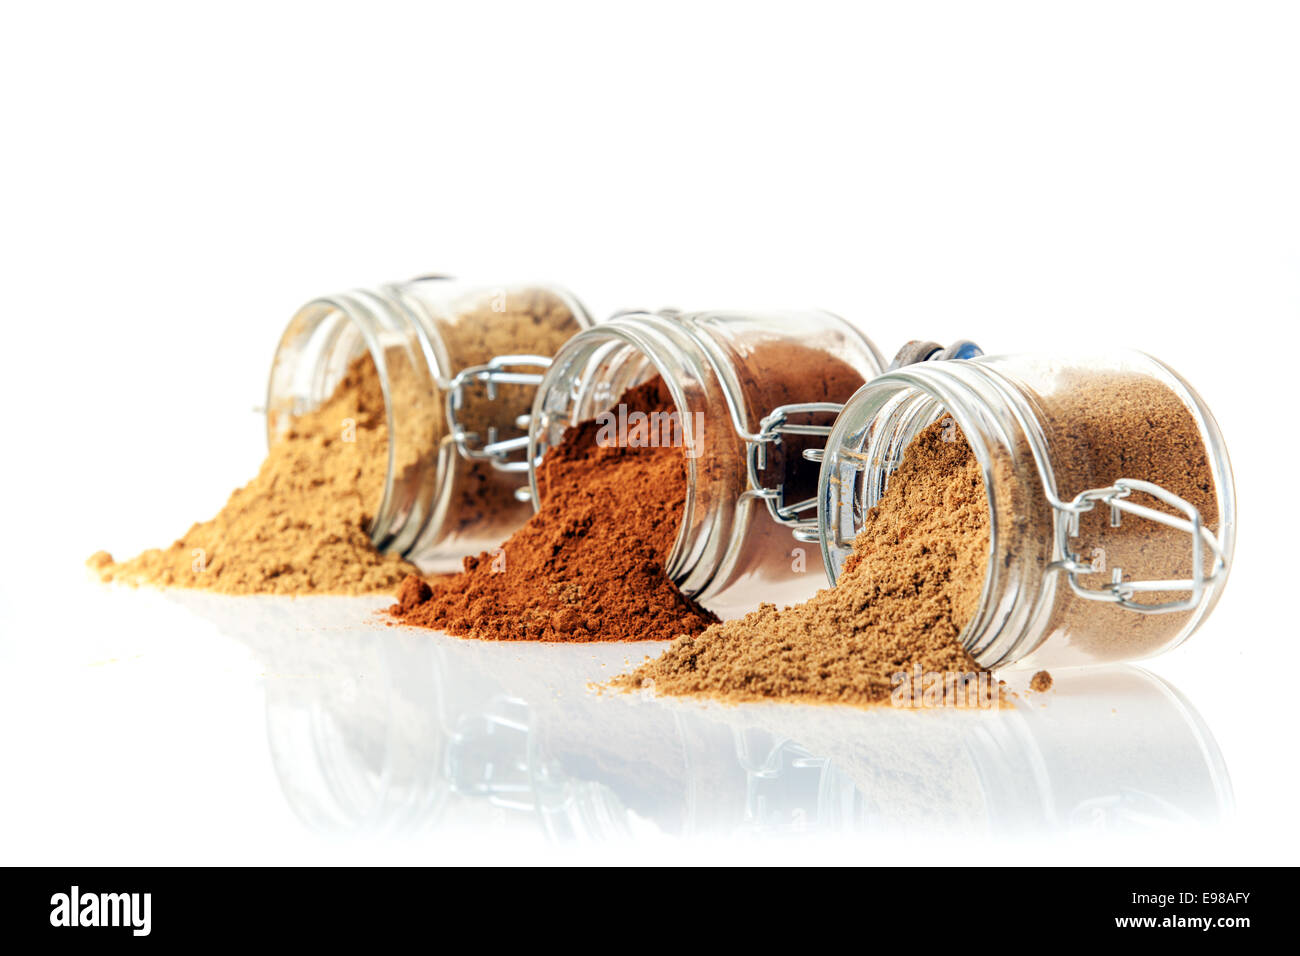 Three glass jars of ground spice lying on their side on a reflective white surface with their contents spilling out with copyspace Stock Photo